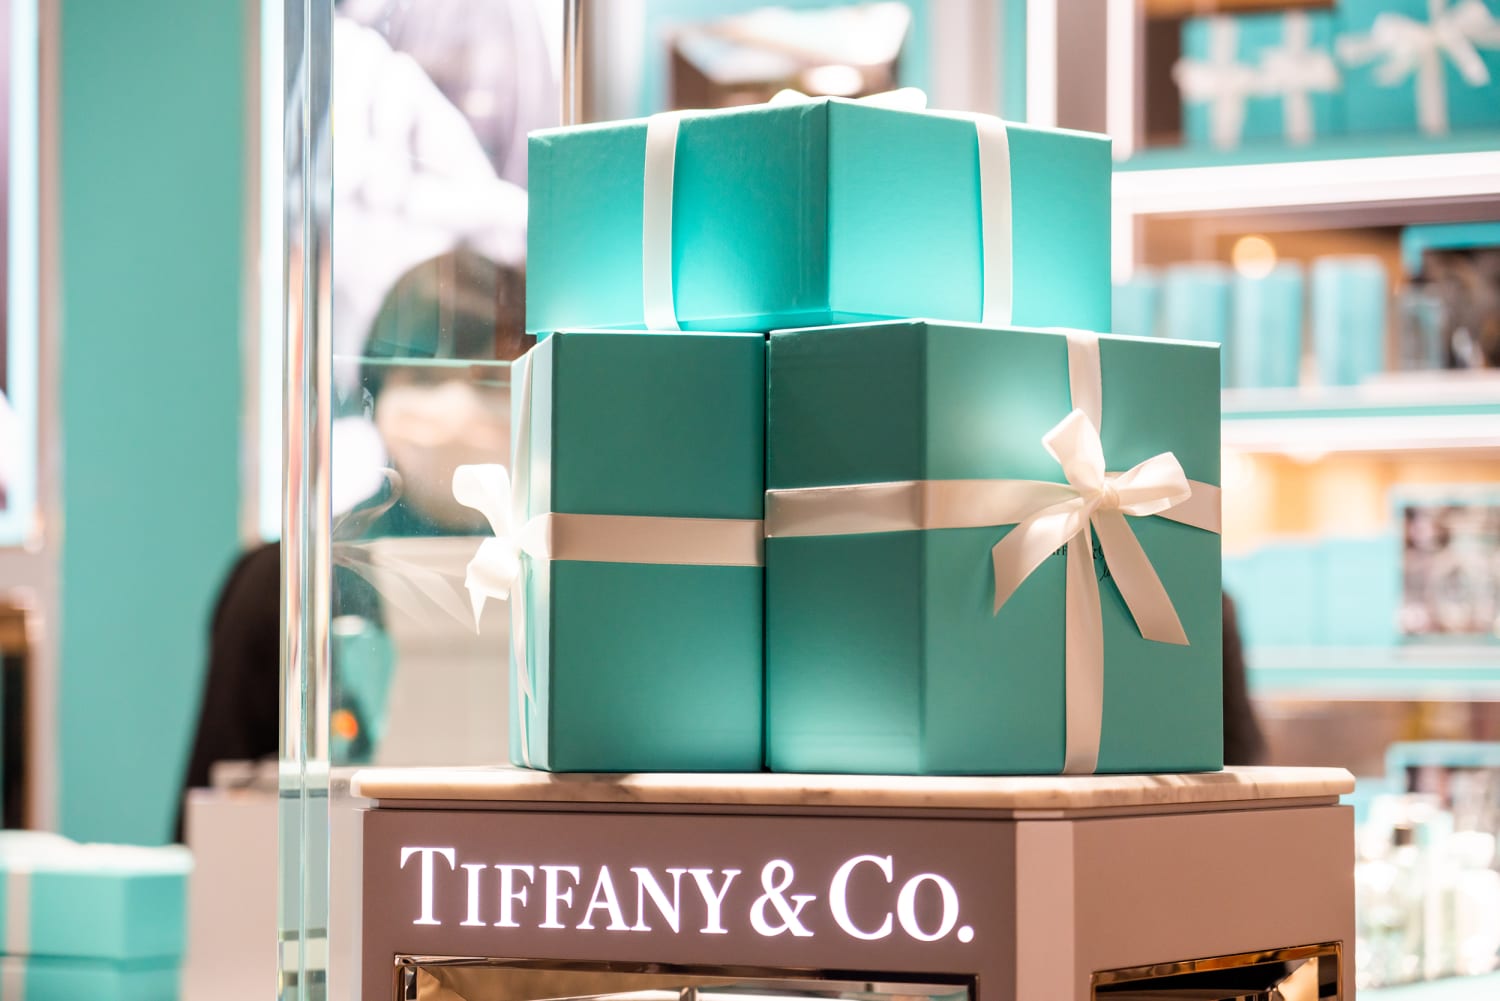 Yellow Is The New Blue As Tiffany & Co Debuts New Color Scheme